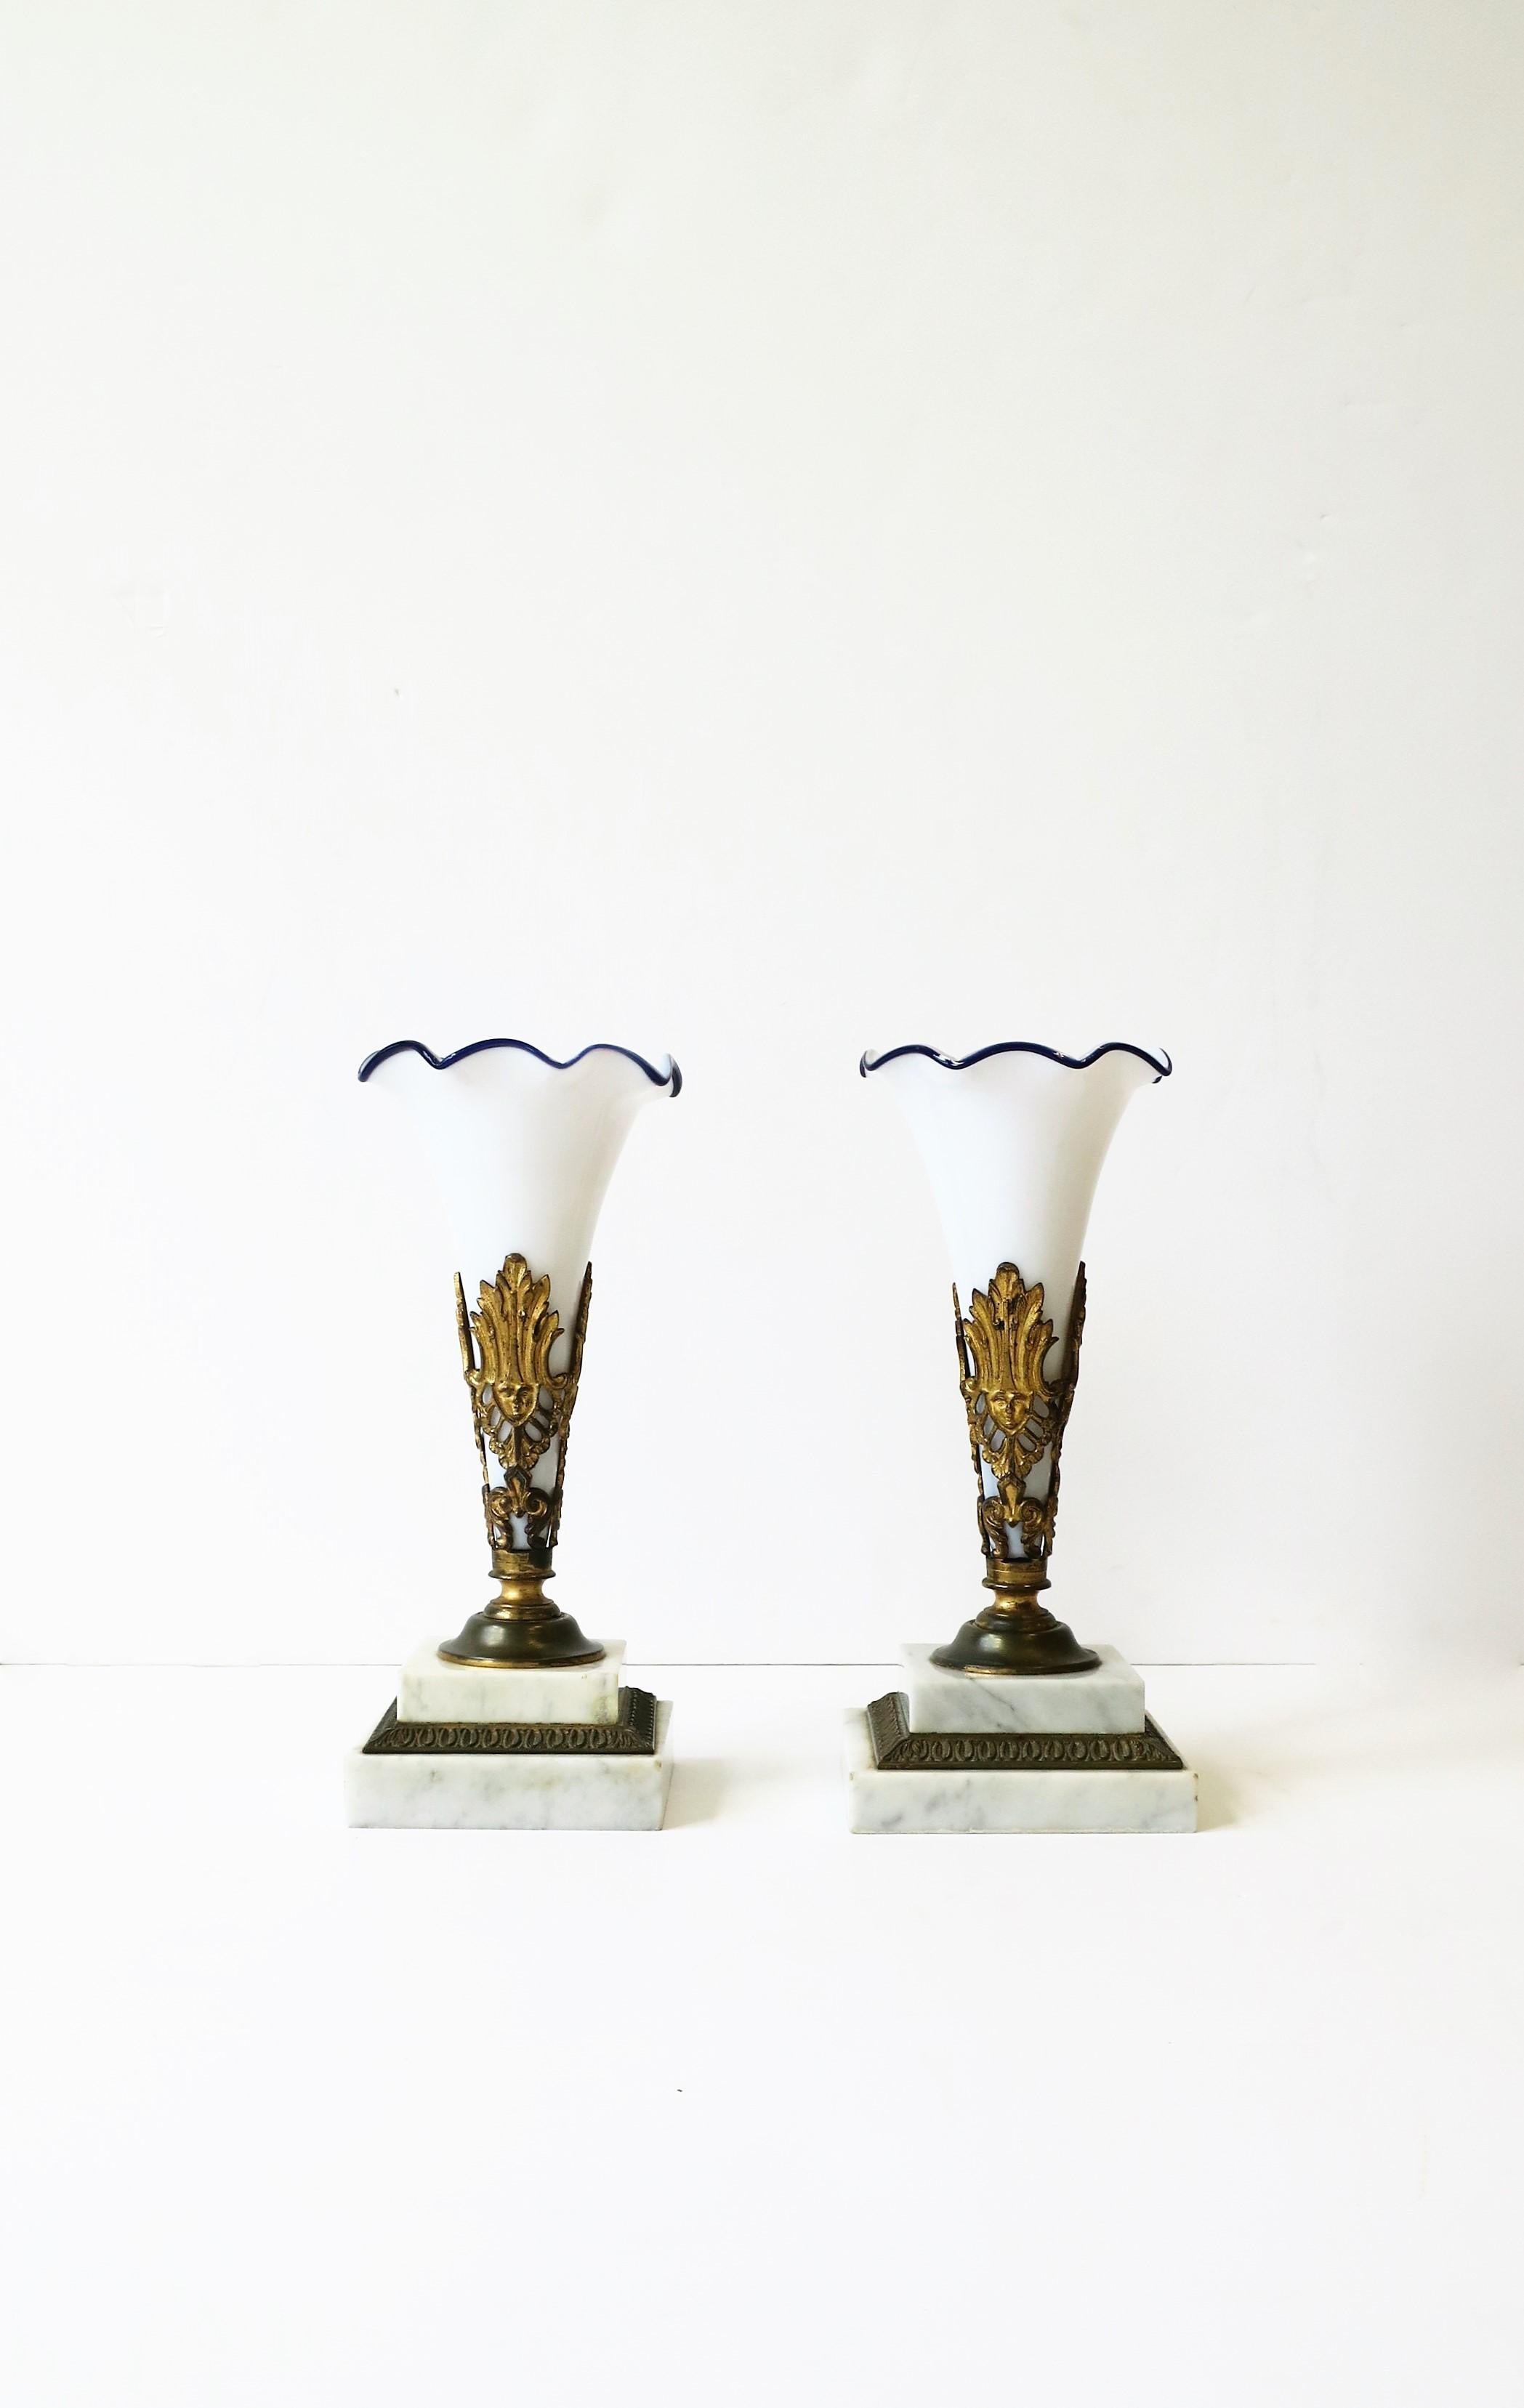 A beautiful and substantial pair of French white and blue art glass vases on gold gilt bronze/brass and white marble bases, circa early-20th century, France. The white art glass vases are hand-blown, edge has a wave design with blue art glass detail